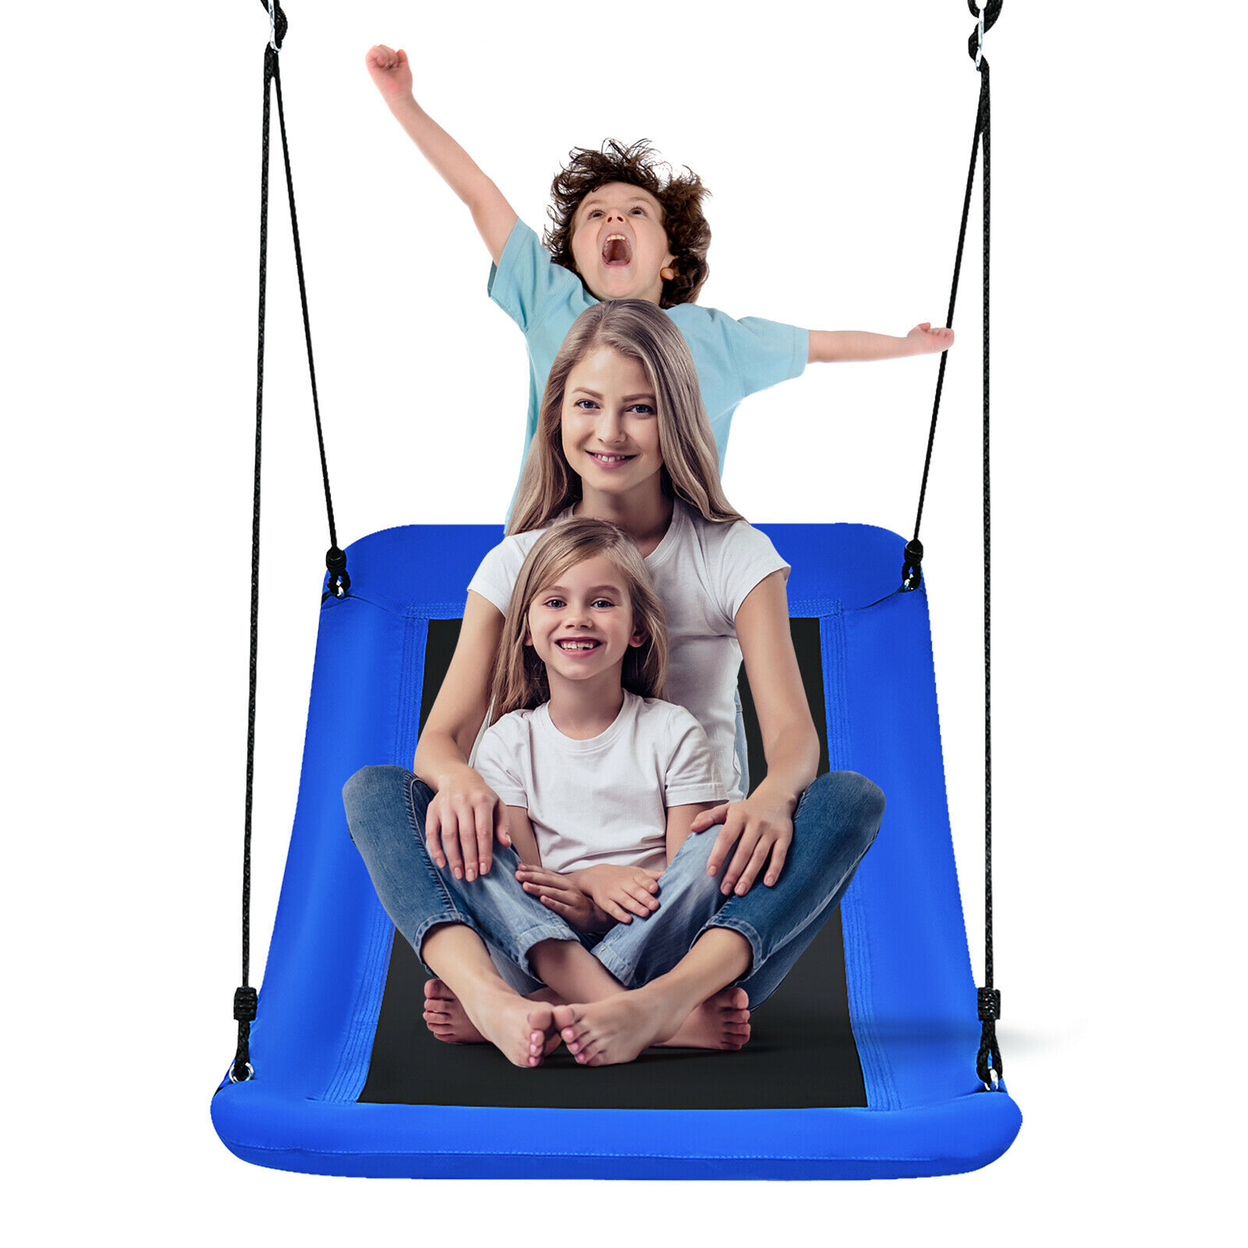 700lb Giant 60'' Platform Tree Swing For Kids And Adults - Blue